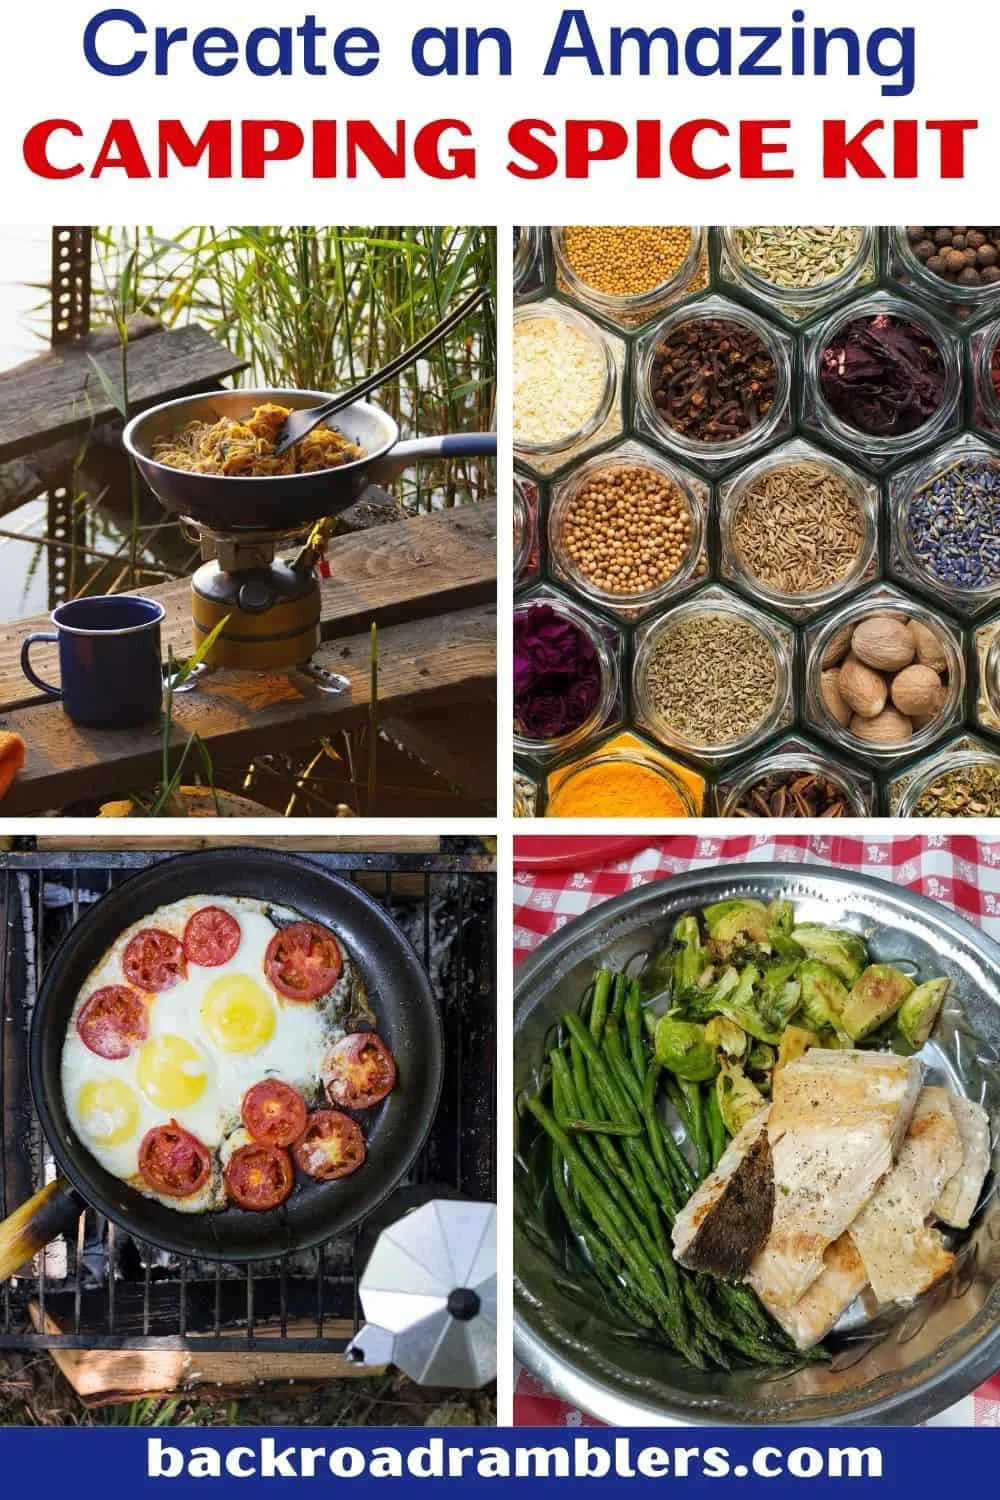 A collage of photos featuring camping meals. Caption reads: Create an Amazing Camping Spice Kit